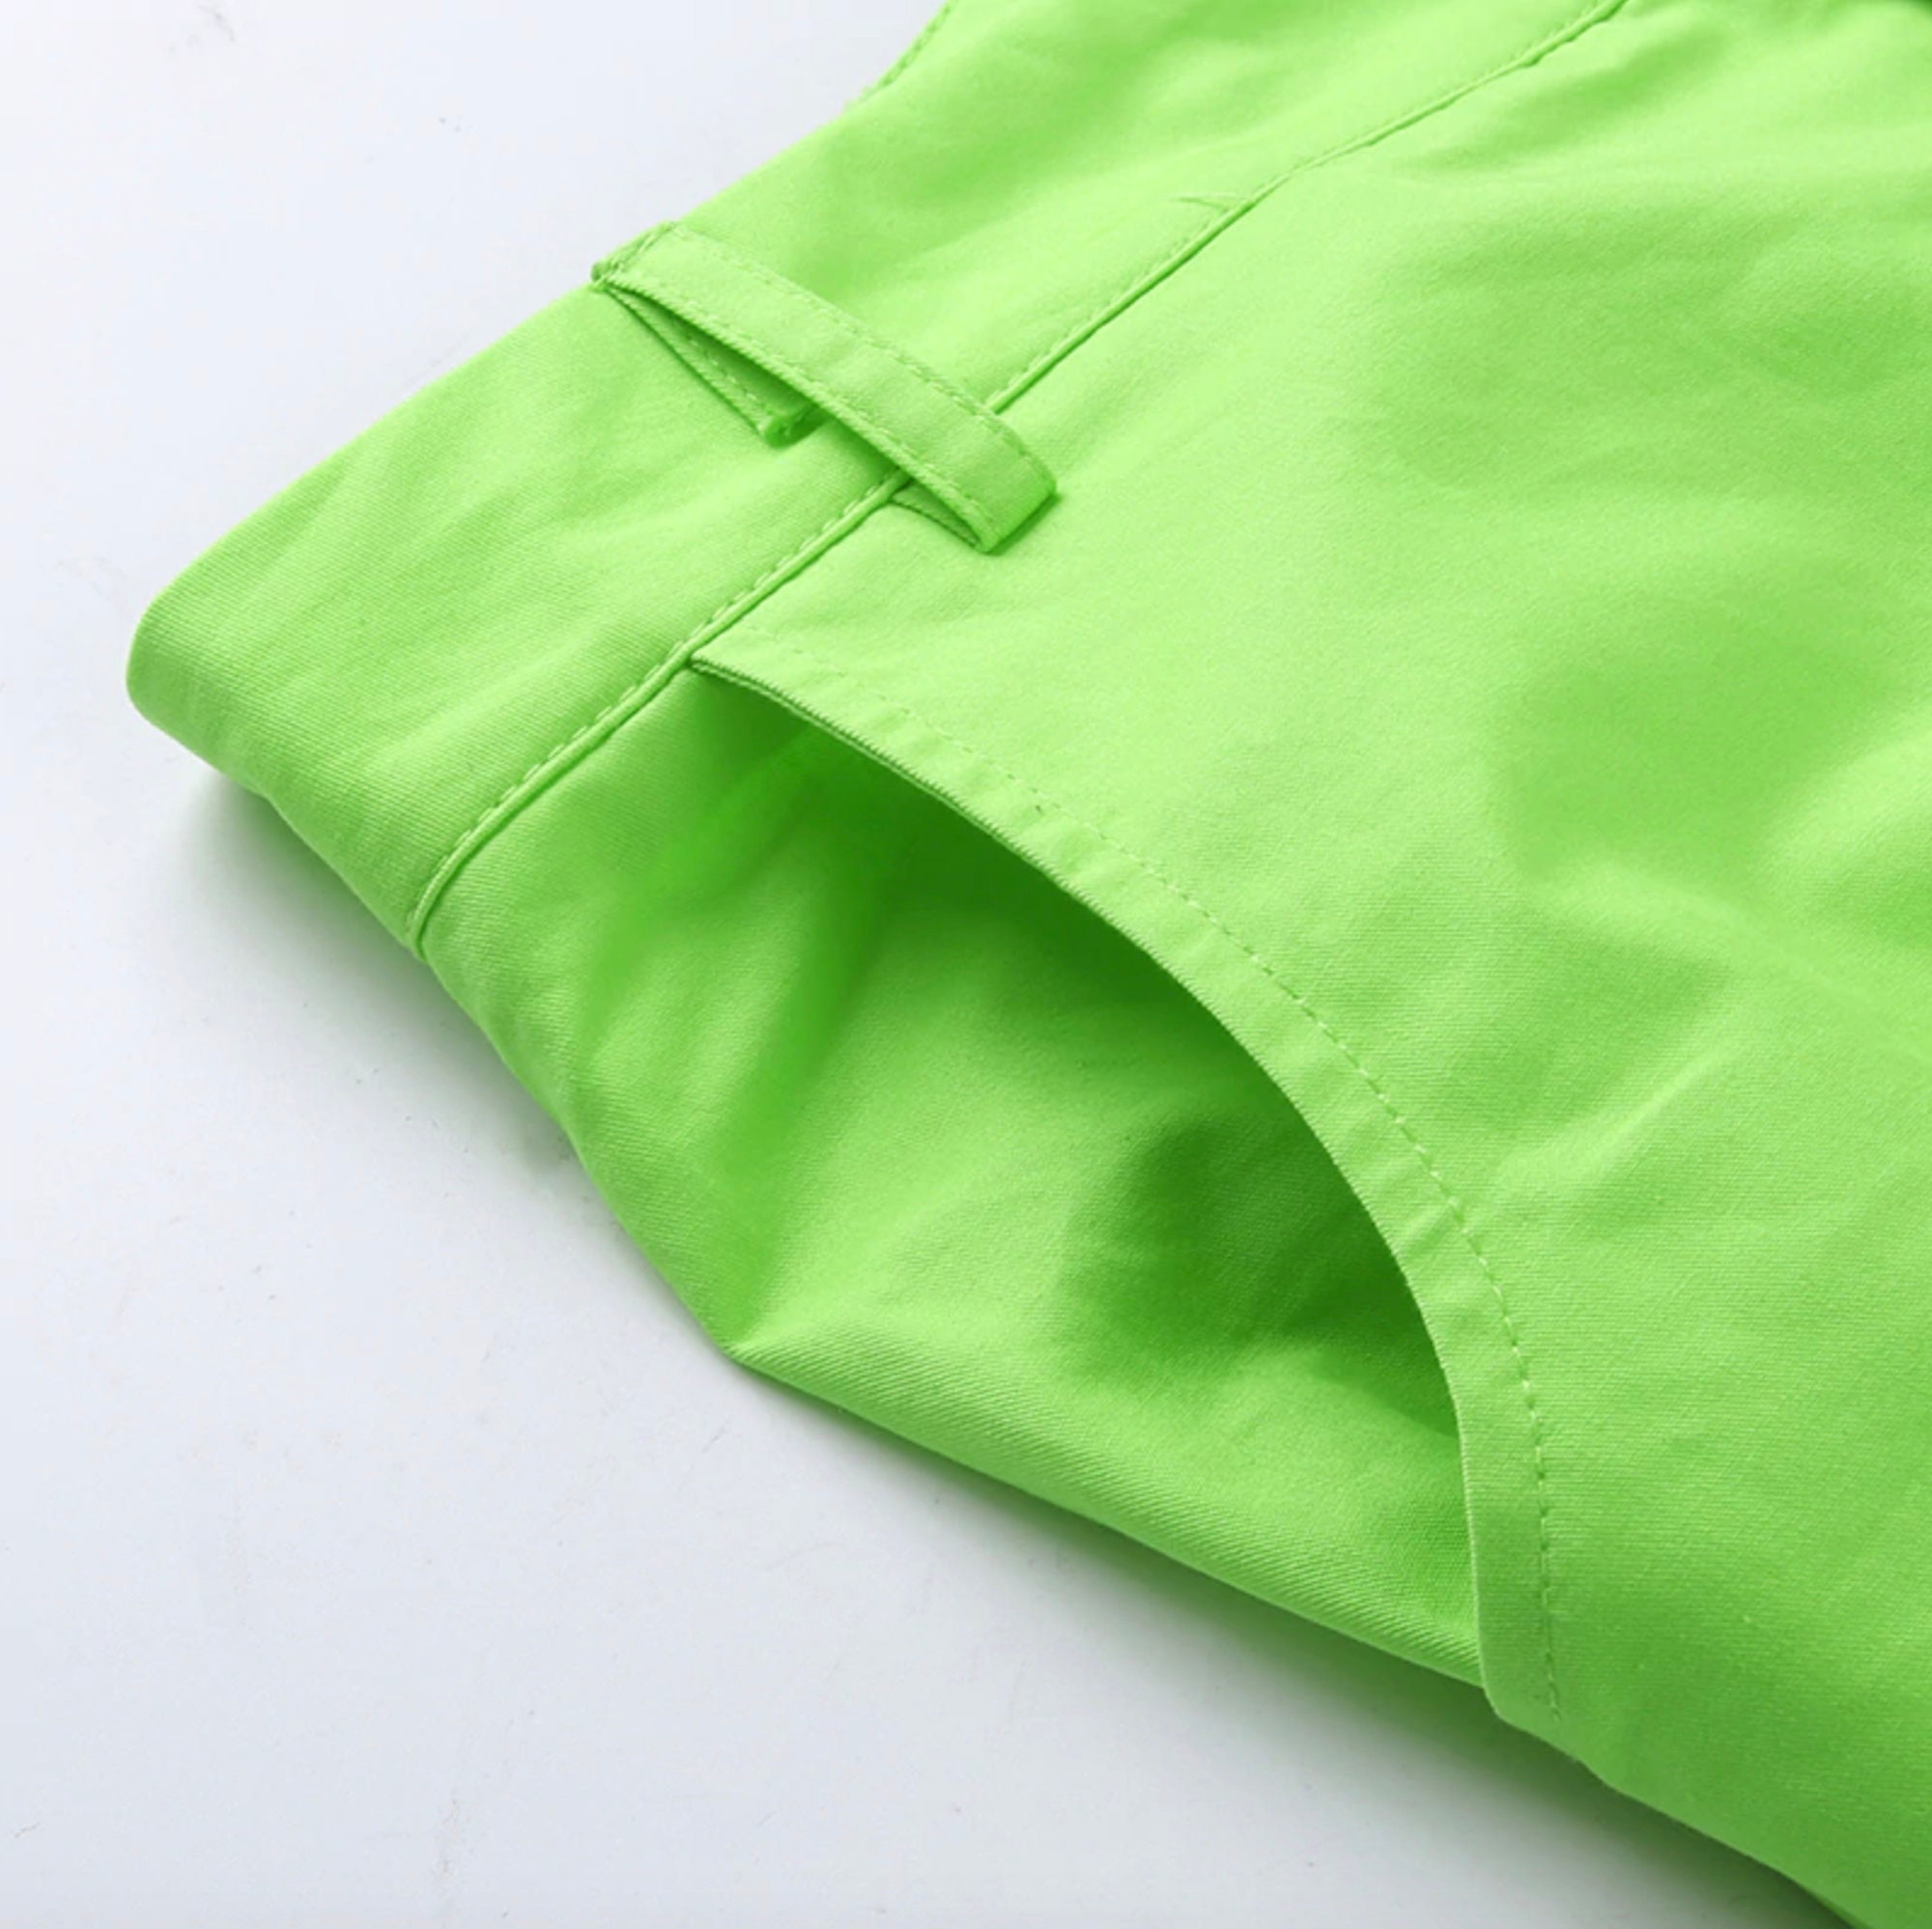 High Waisted Cargo Pants In Neon Green